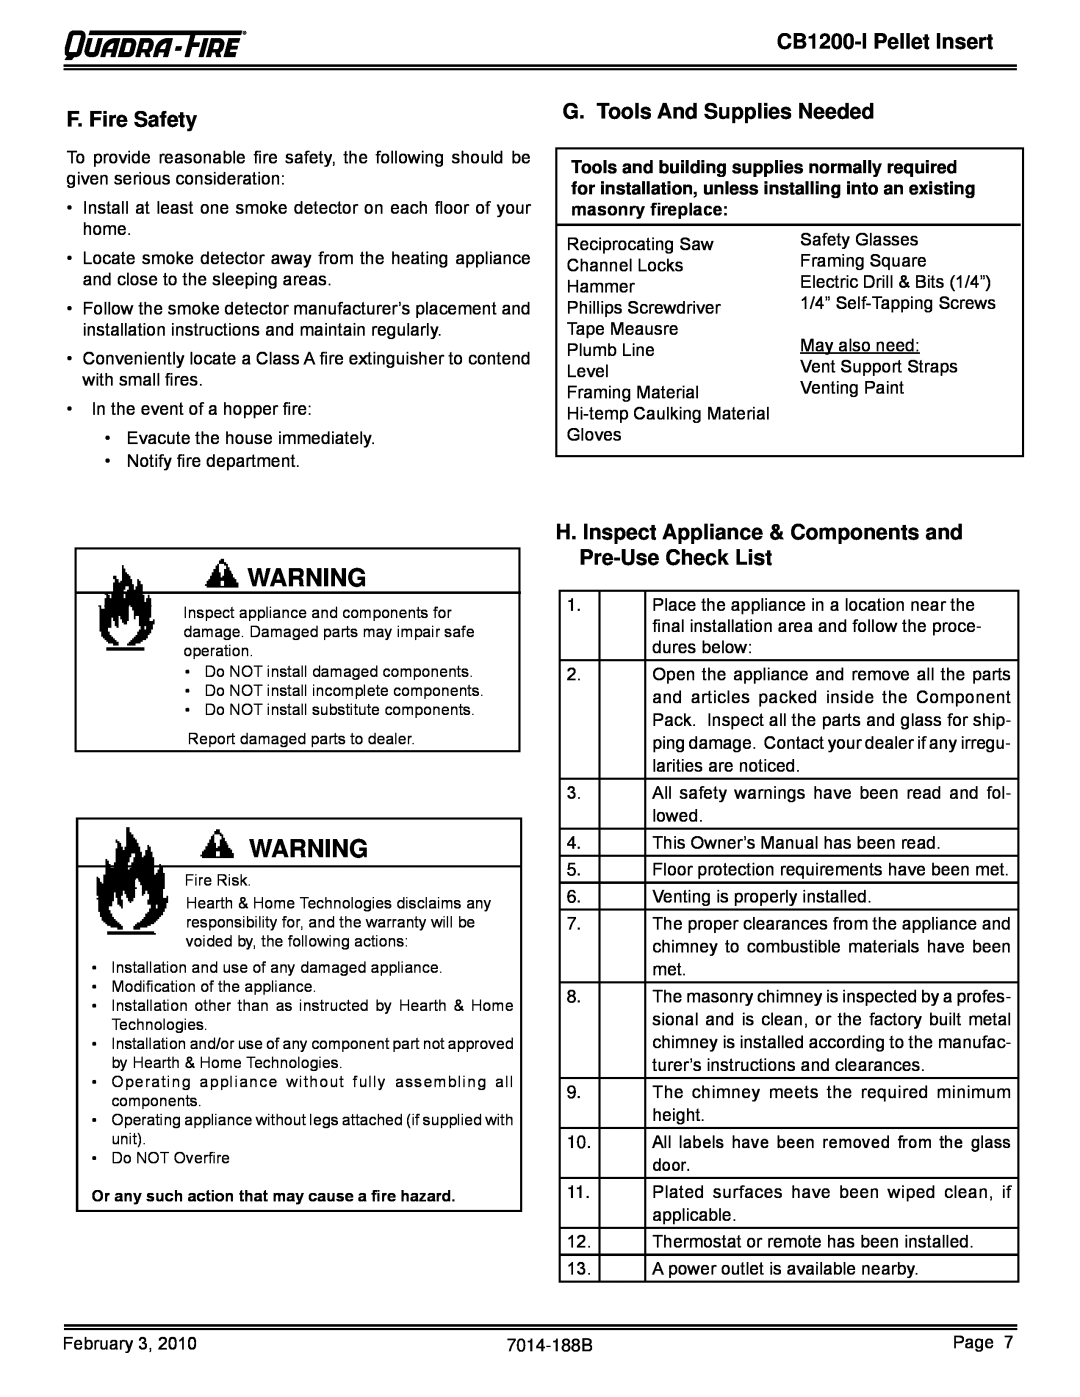 Quadra-Fire CB1200MI-MBK, CB1200I owner manual F. Fire Safety, G. Tools And Supplies Needed, CB1200-IPellet Insert 